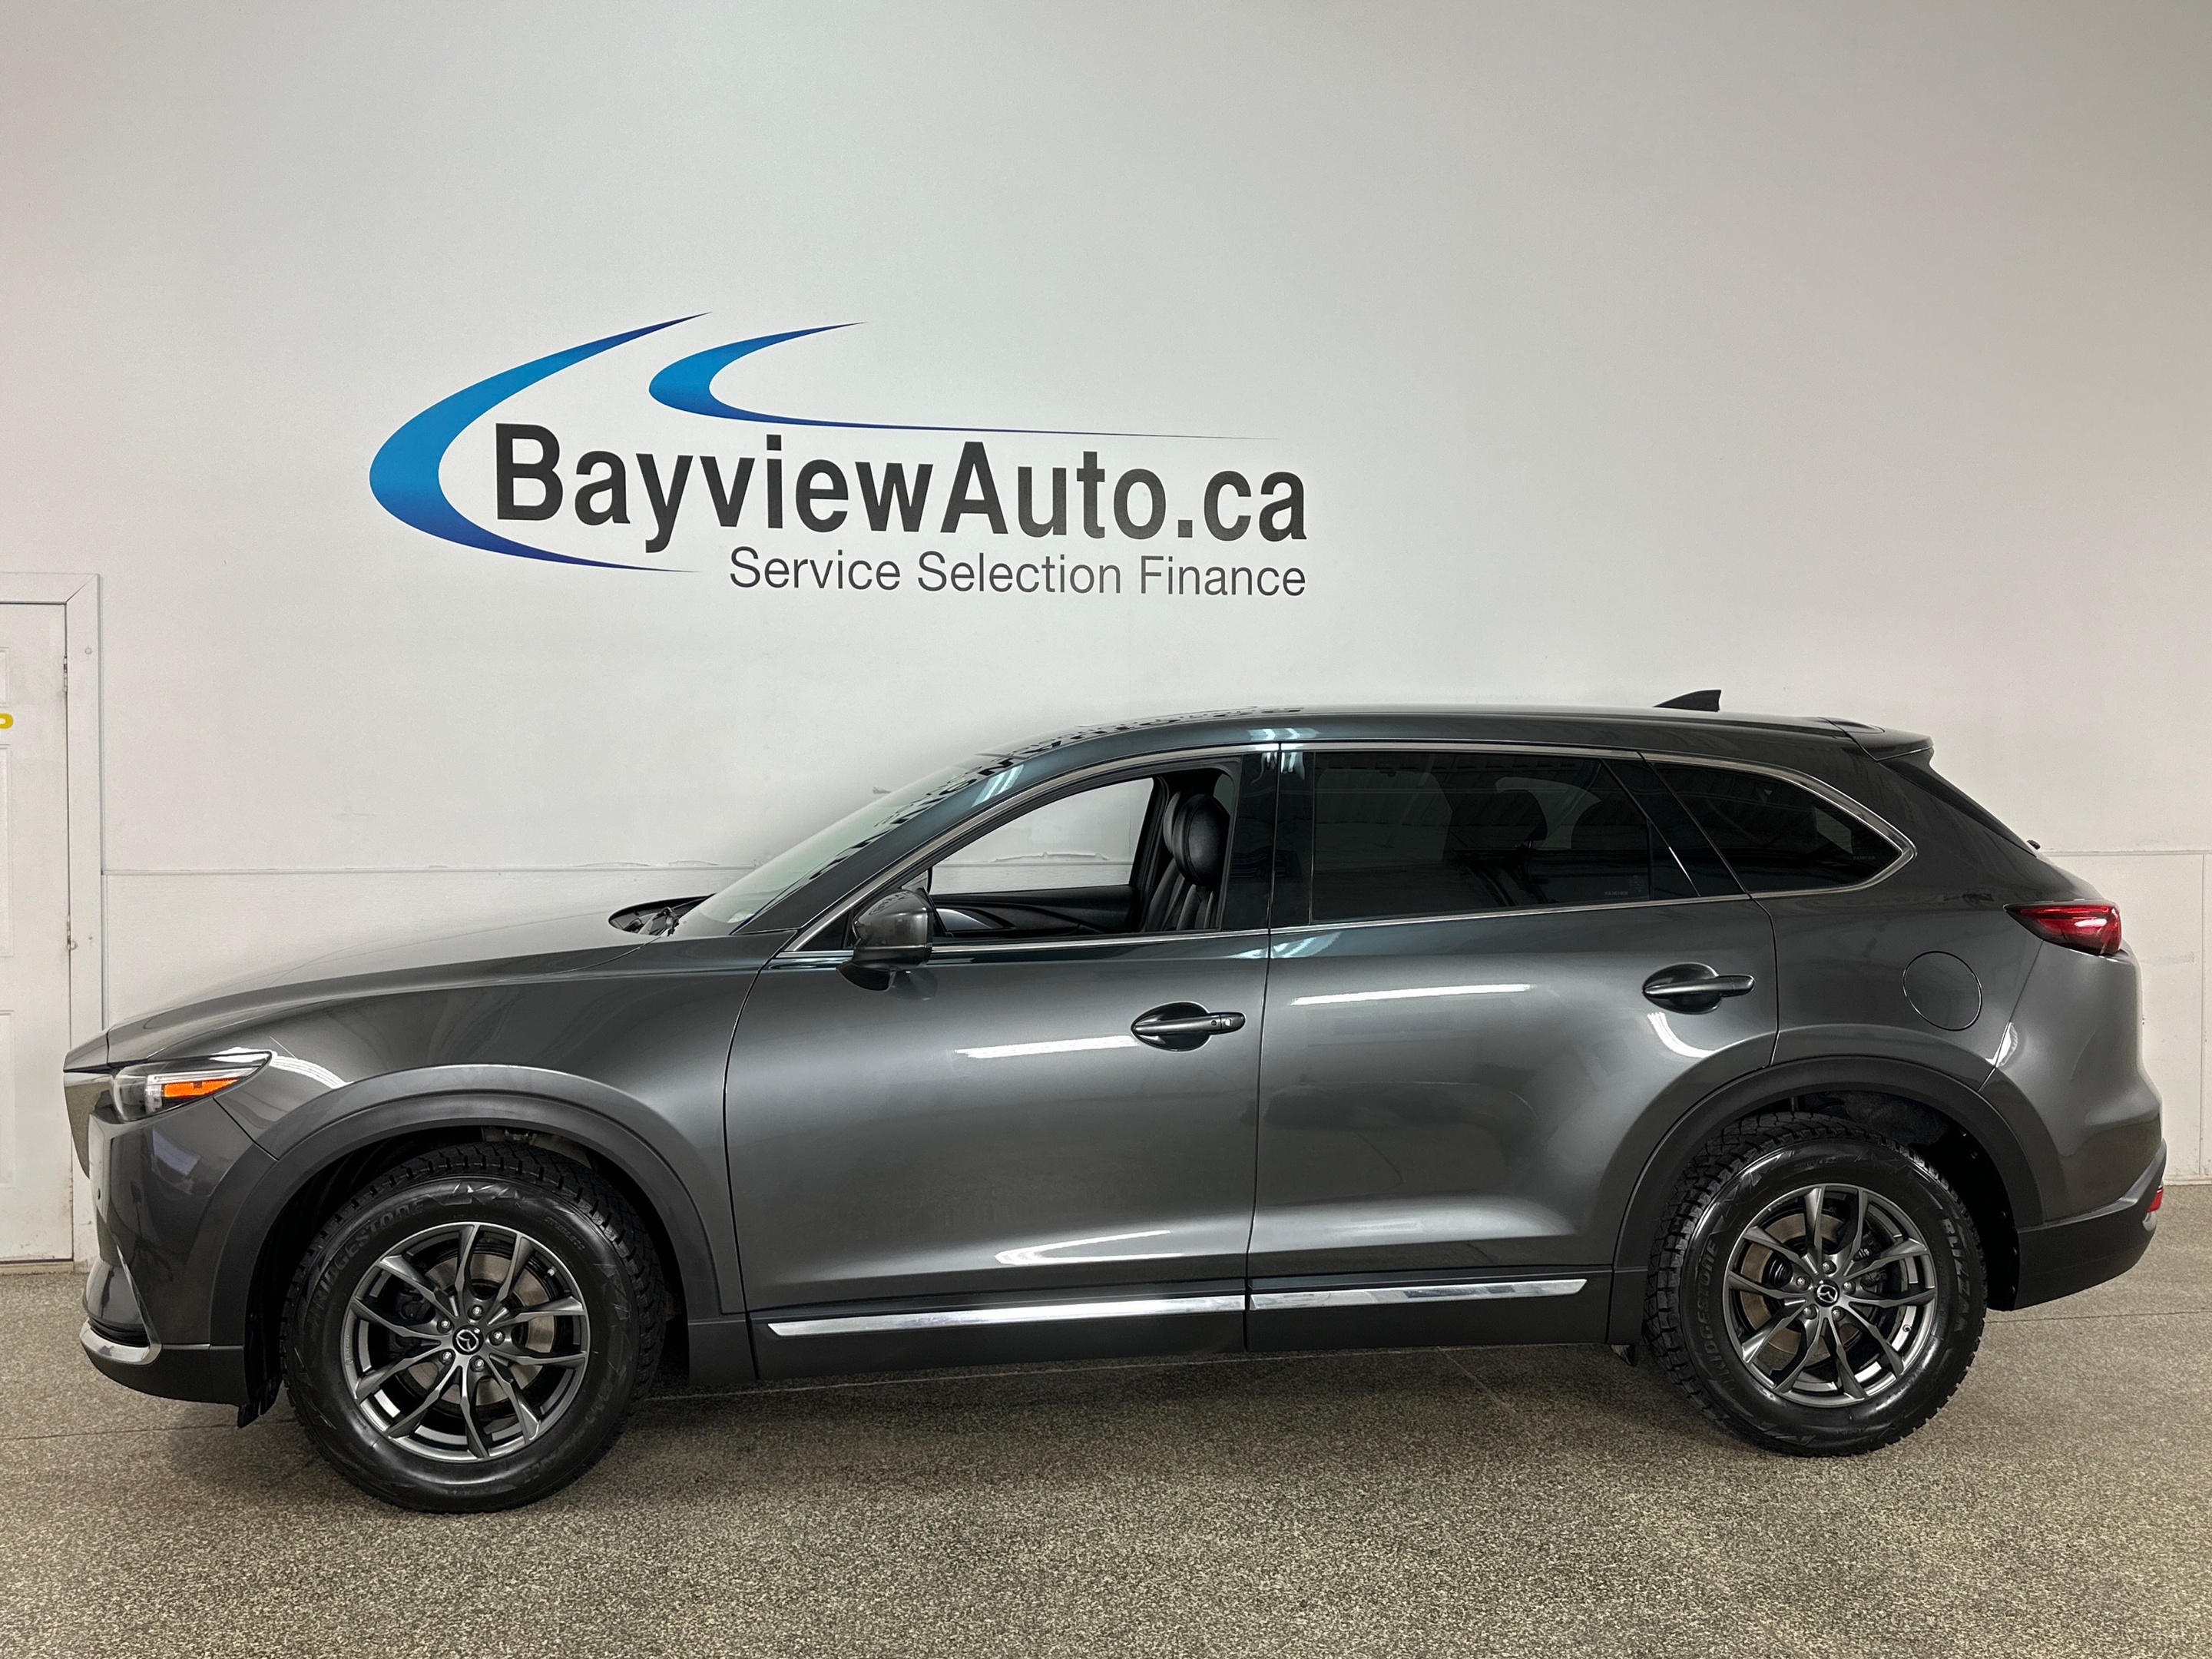 2019 Mazda CX-9 GT AWD! 7 PASS, ROOF, LEATHER, NAVI & MORE!